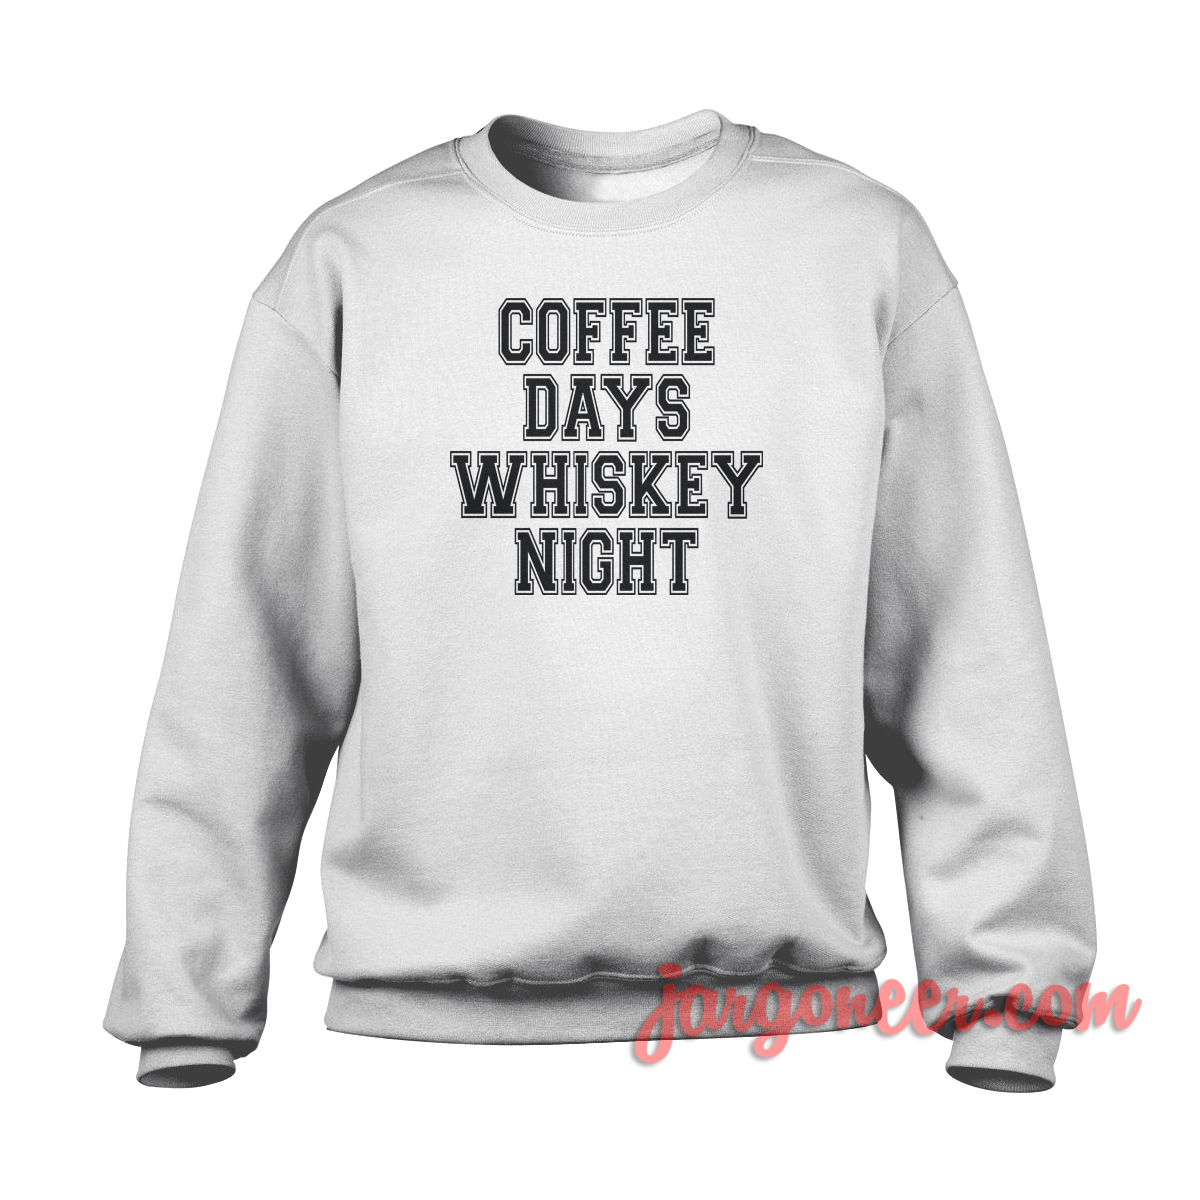 Coffee Days Whiskey Night - Shop Unique Graphic Cool Shirt Designs